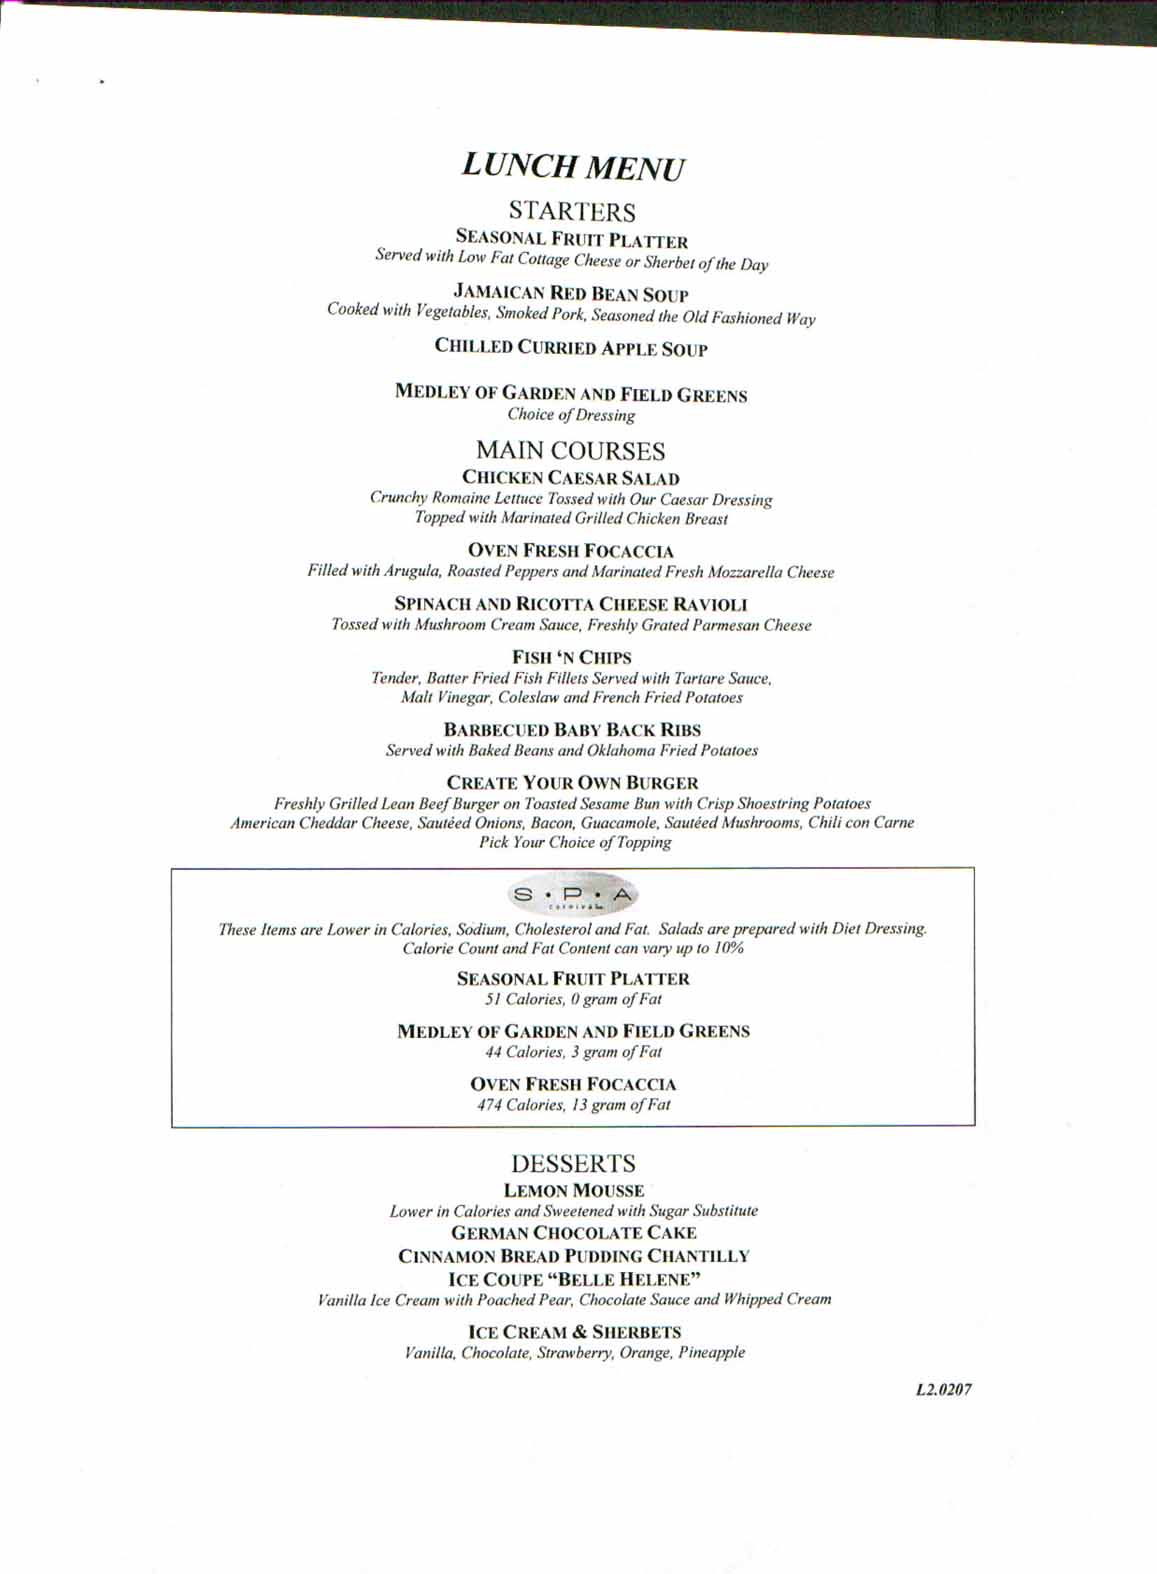 Carnival Dream Lunch Menu 2 (now they have a brunch instead)